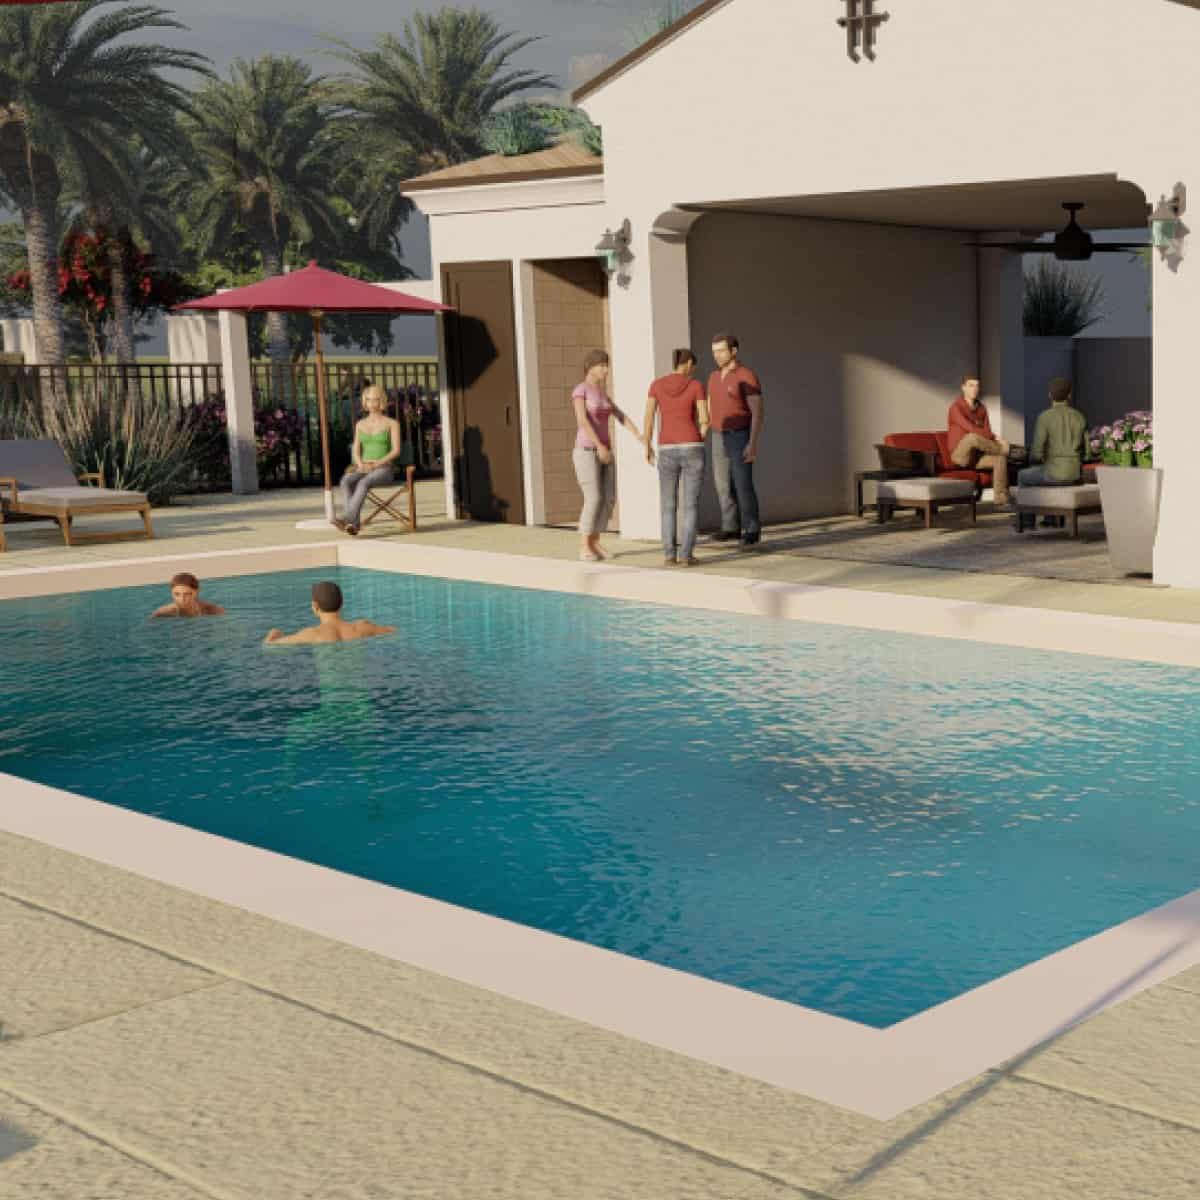 Pool area rendering of Townes at Broadway by Melia Homes in Anaheim, CA